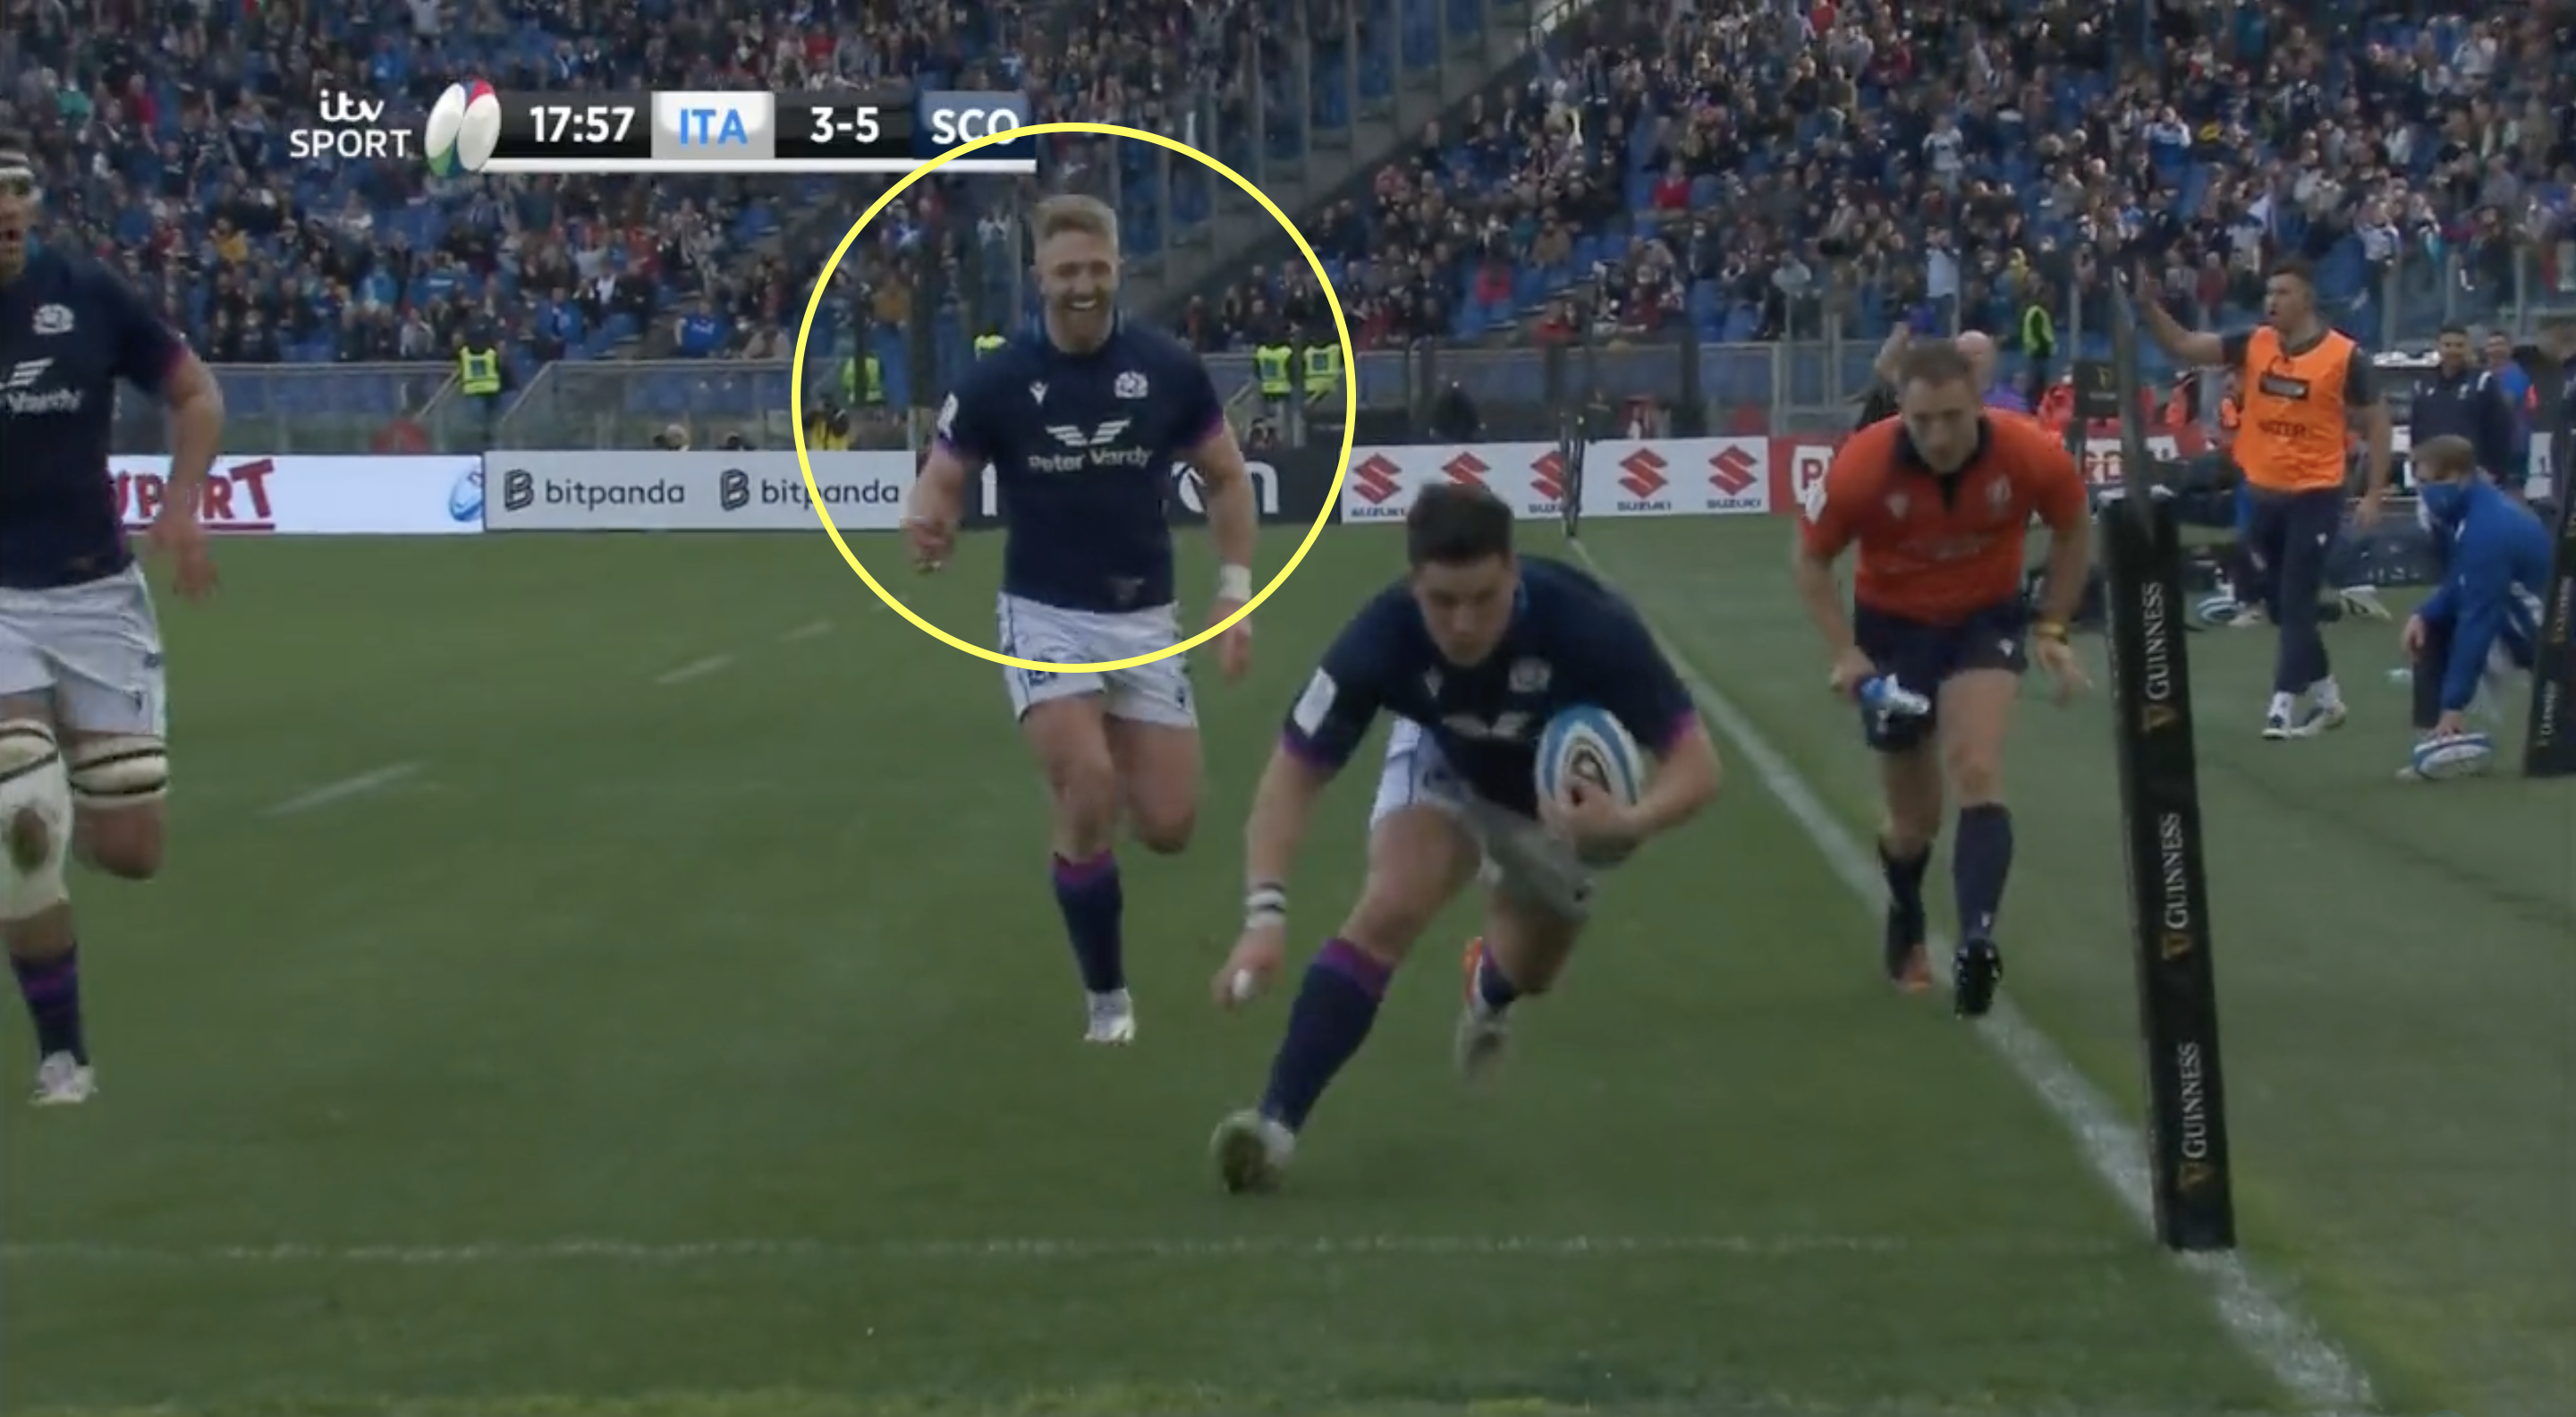 Steyn can only laugh as teammate cruelly robs him of his first Six Nations try